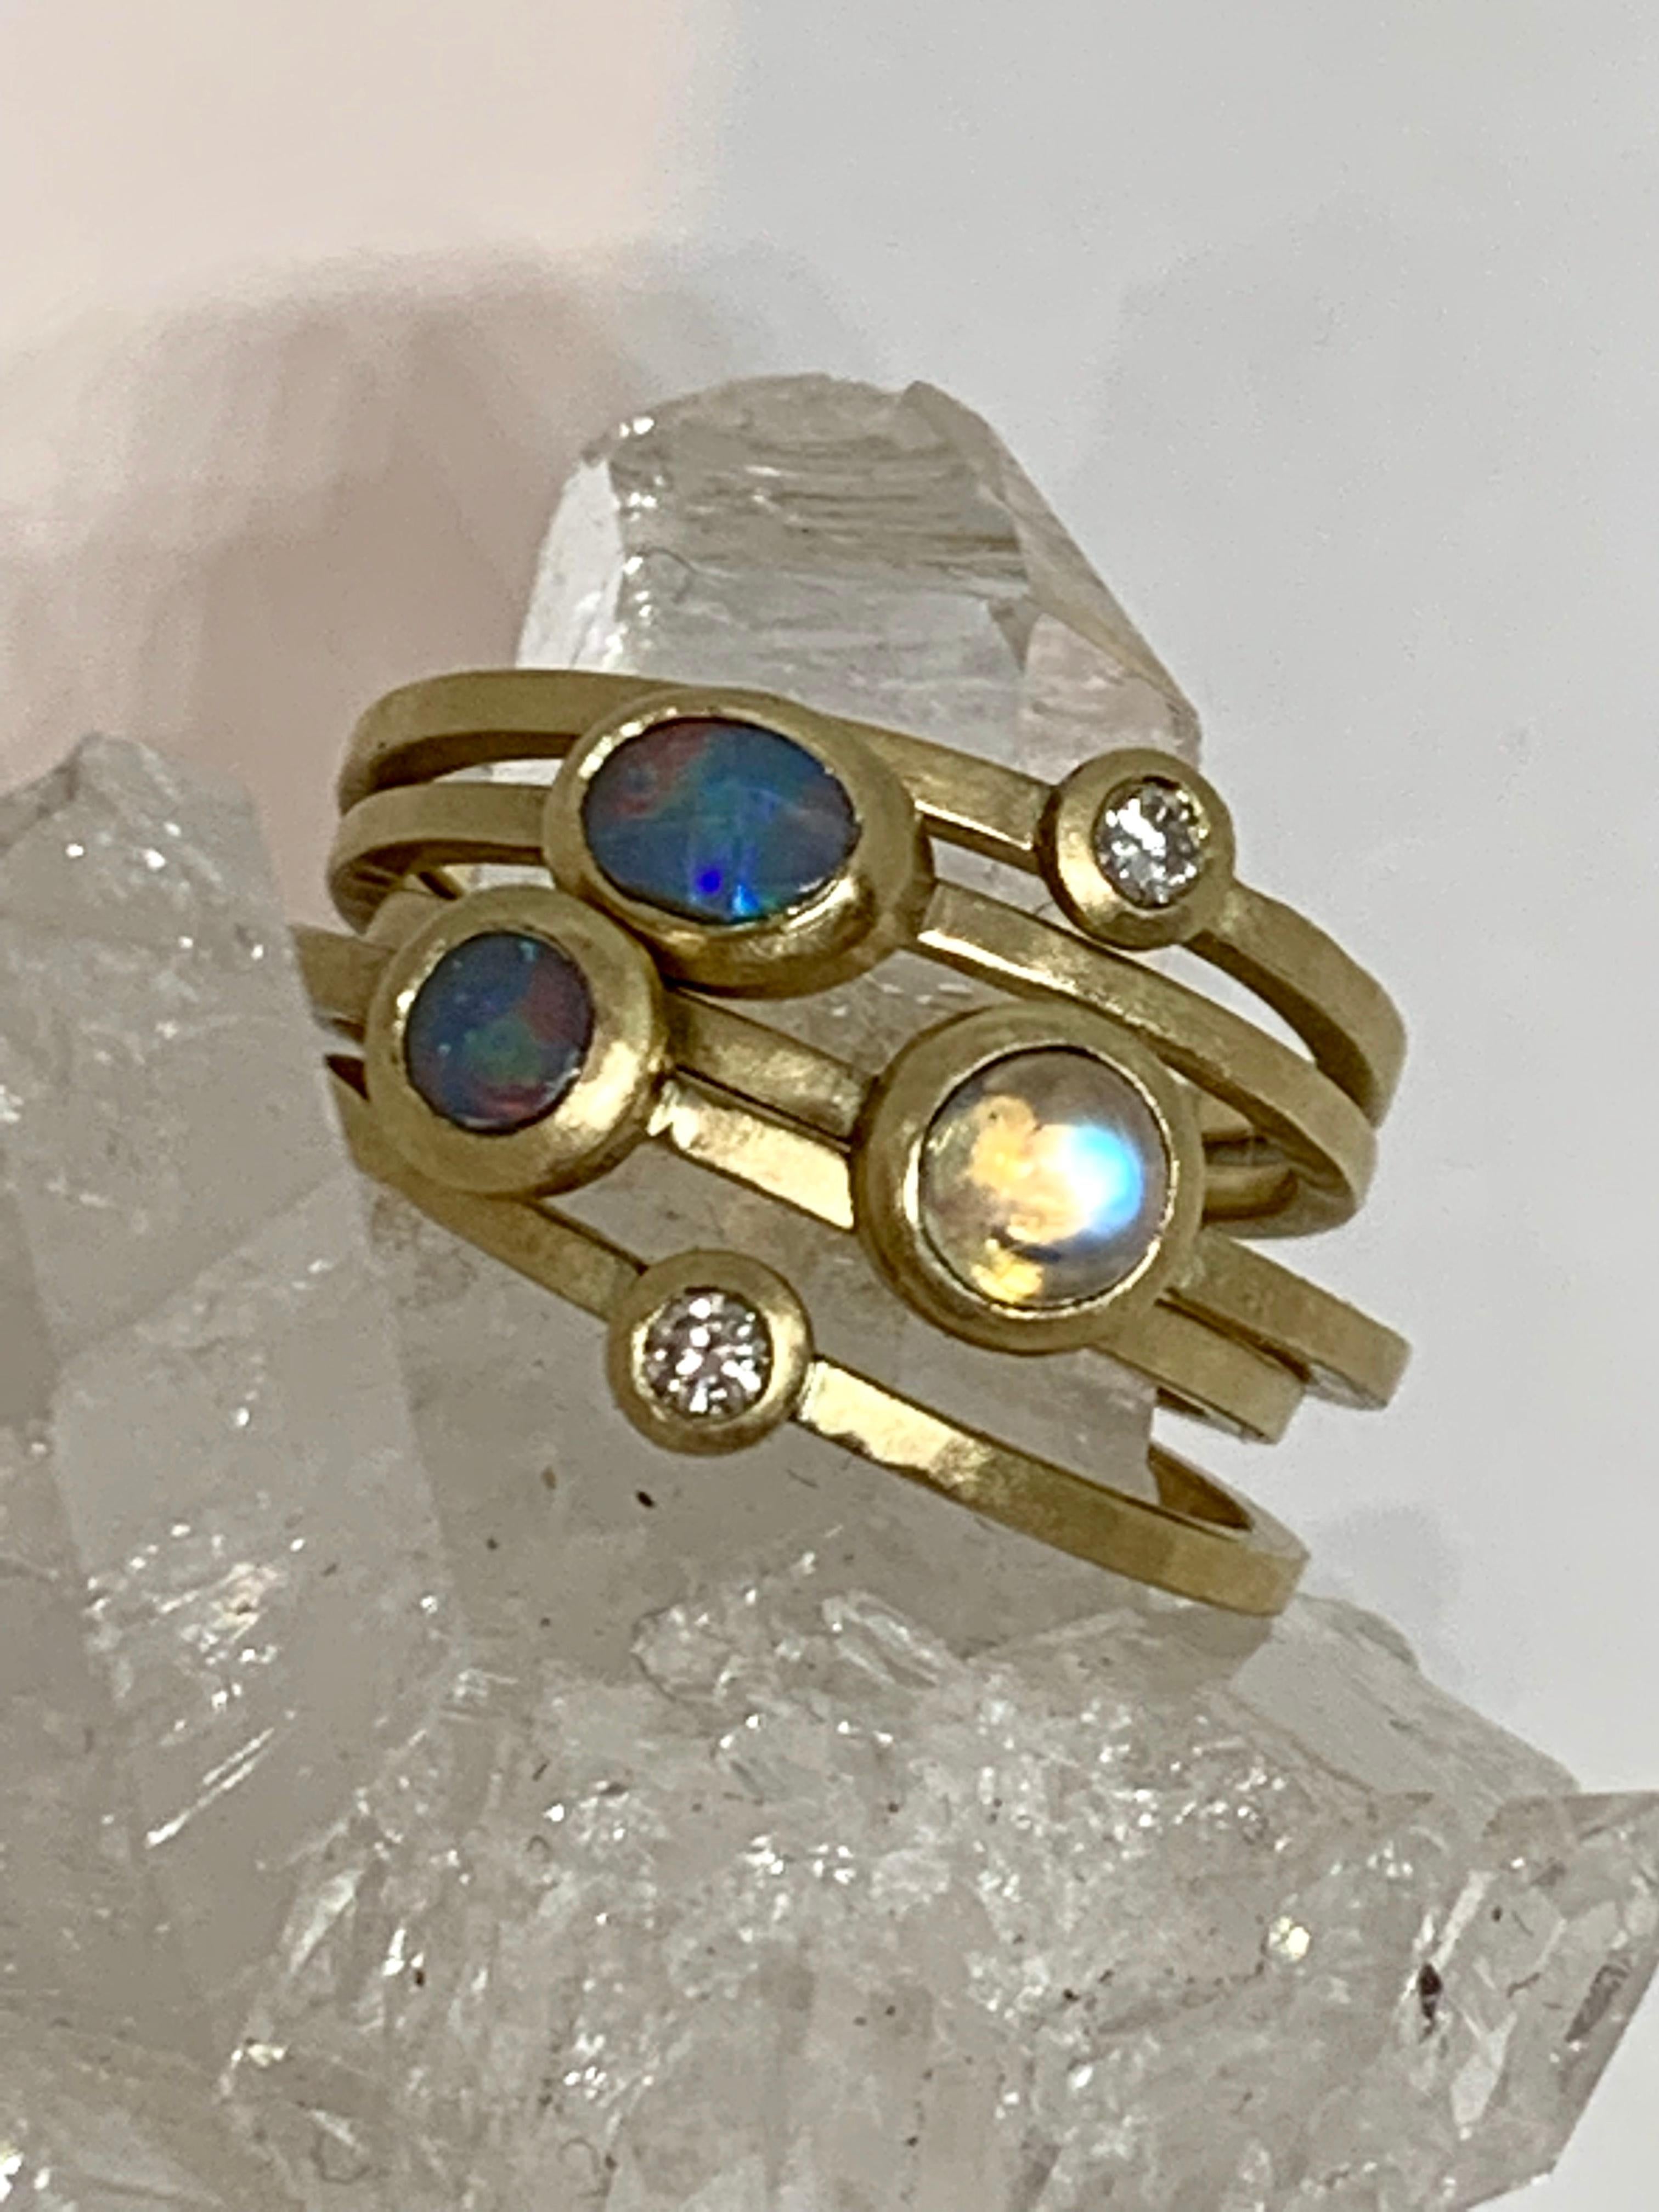 Andrea Estelle Jewellery handmade opal stack rings featuring 2 solid Australian Black opals from Lightening Ridge in Australia. With beautiful blues, greens and reds these are complimented beautifully with 2 diamonds and a rainbow moonstone to form